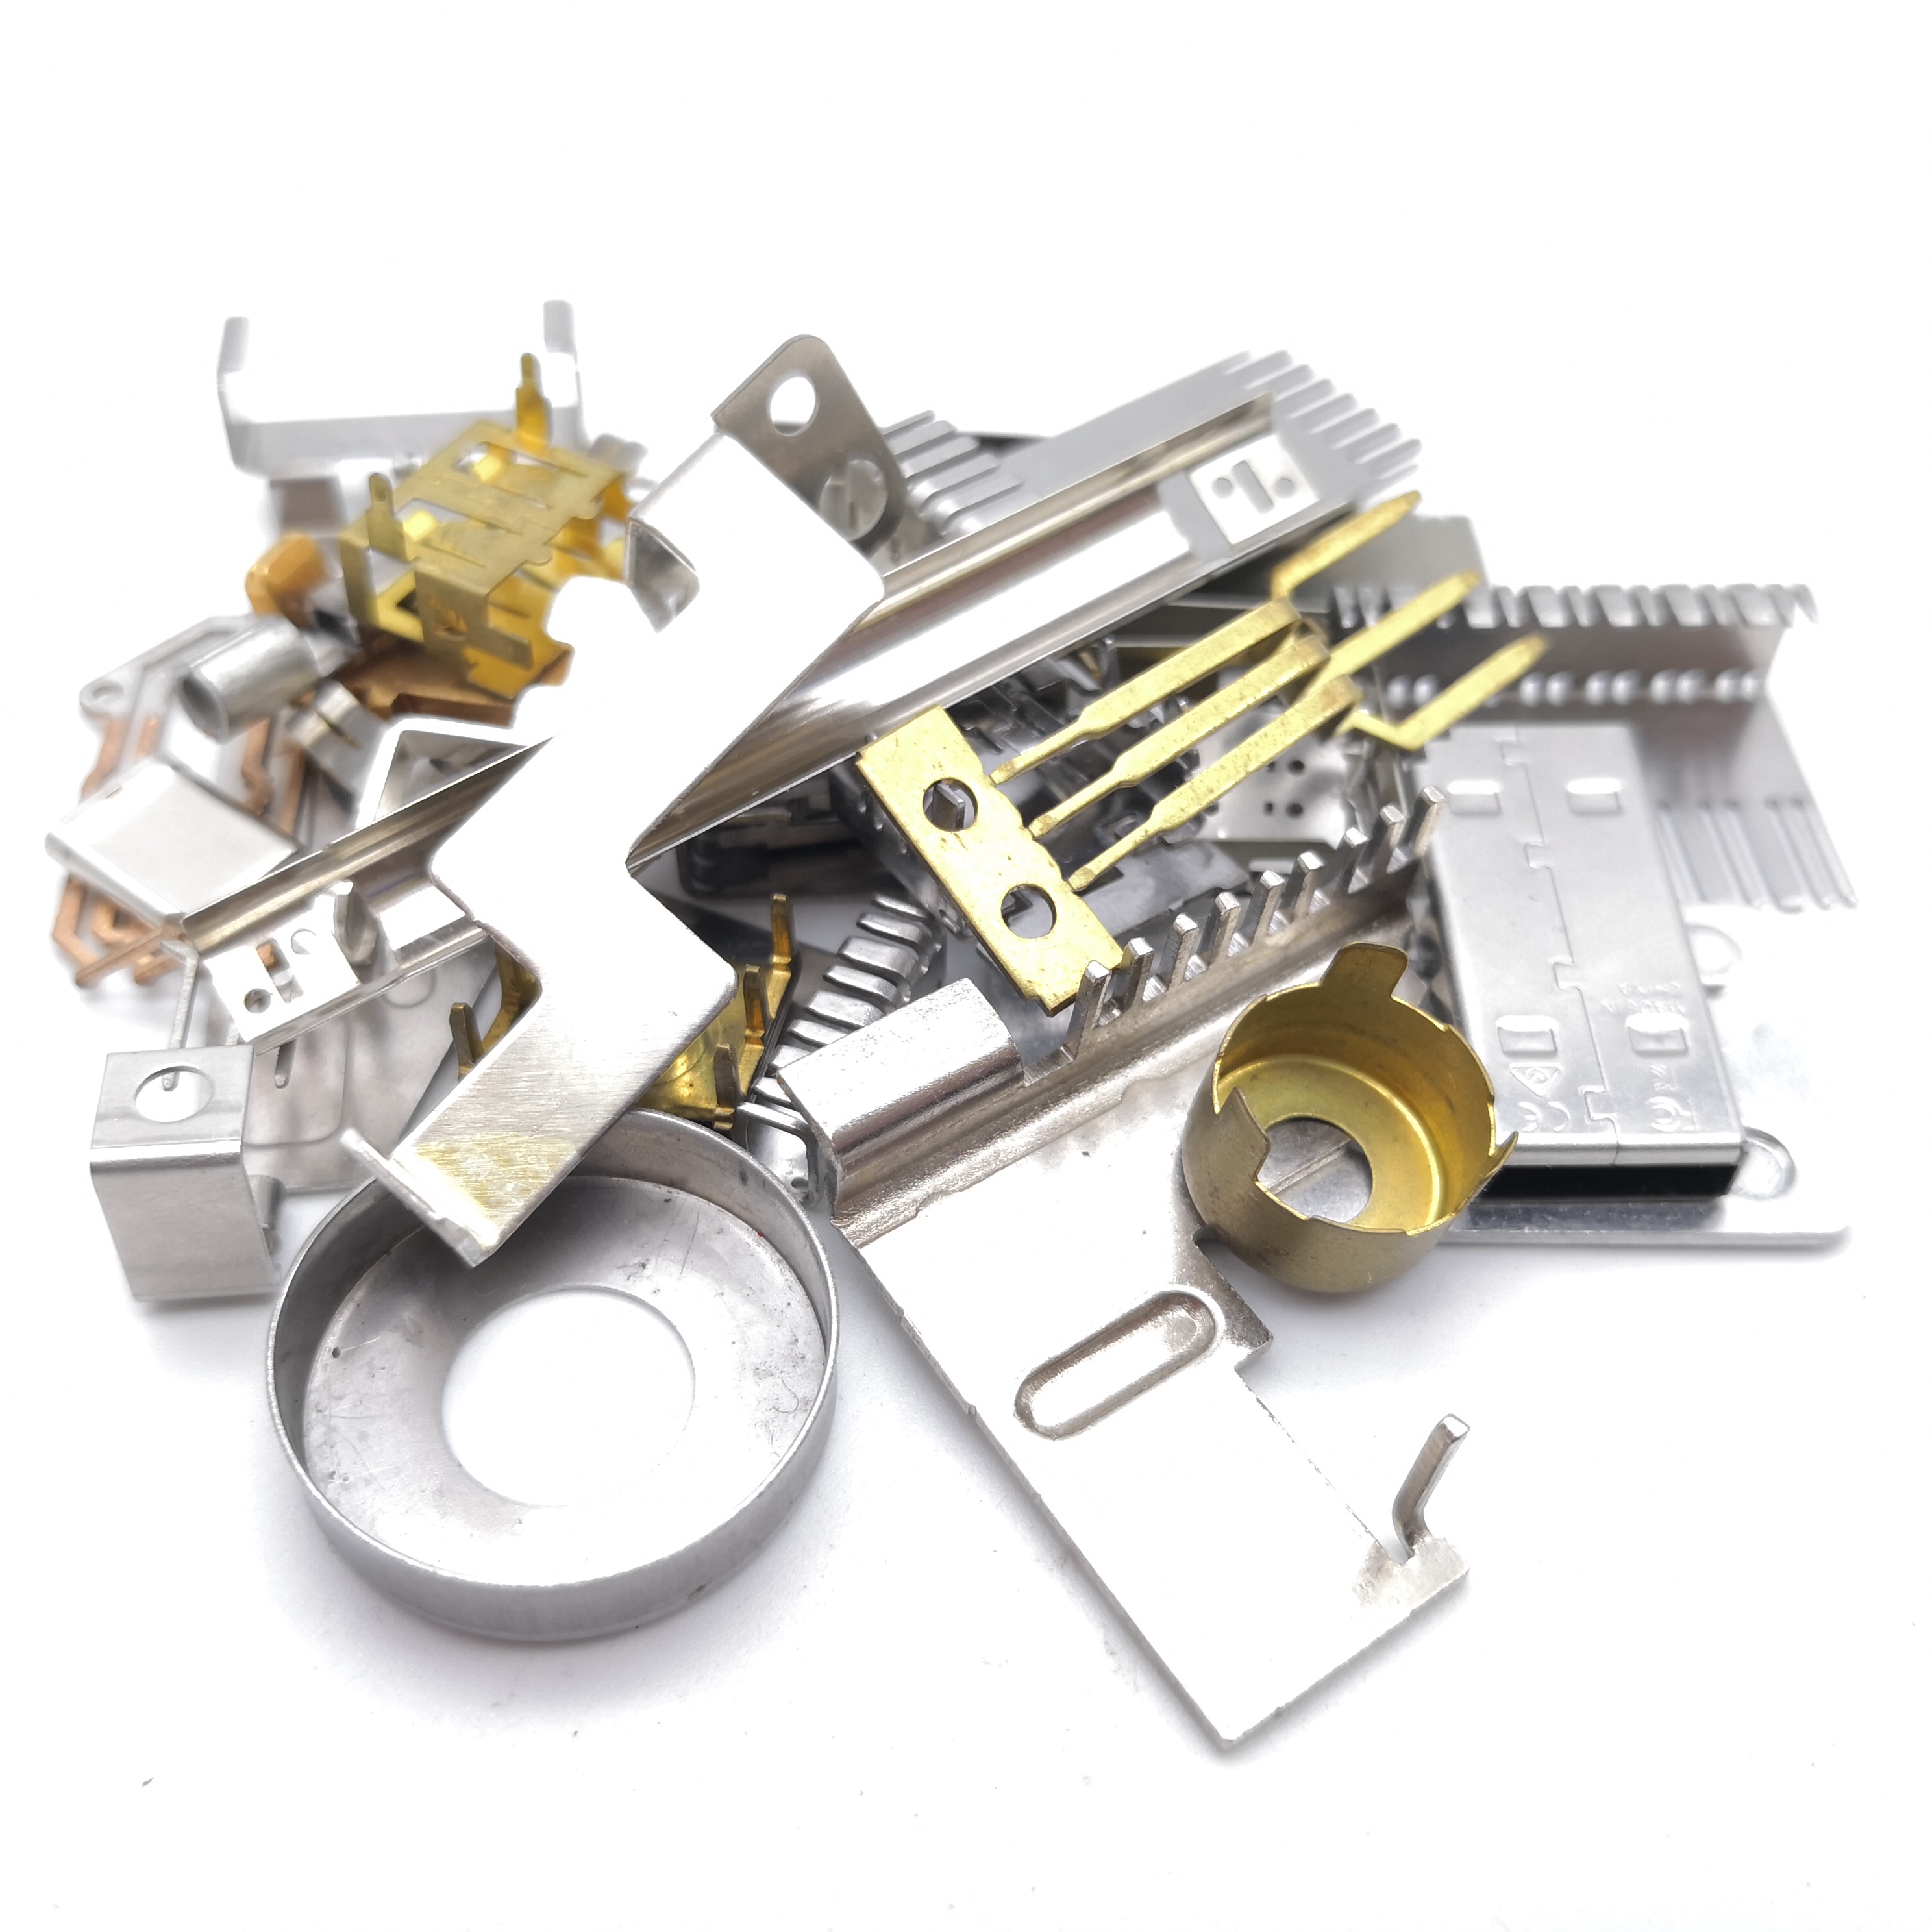 ODM Metal Stamping Products Service –  All series of metal stamping products – RAISING-Elec